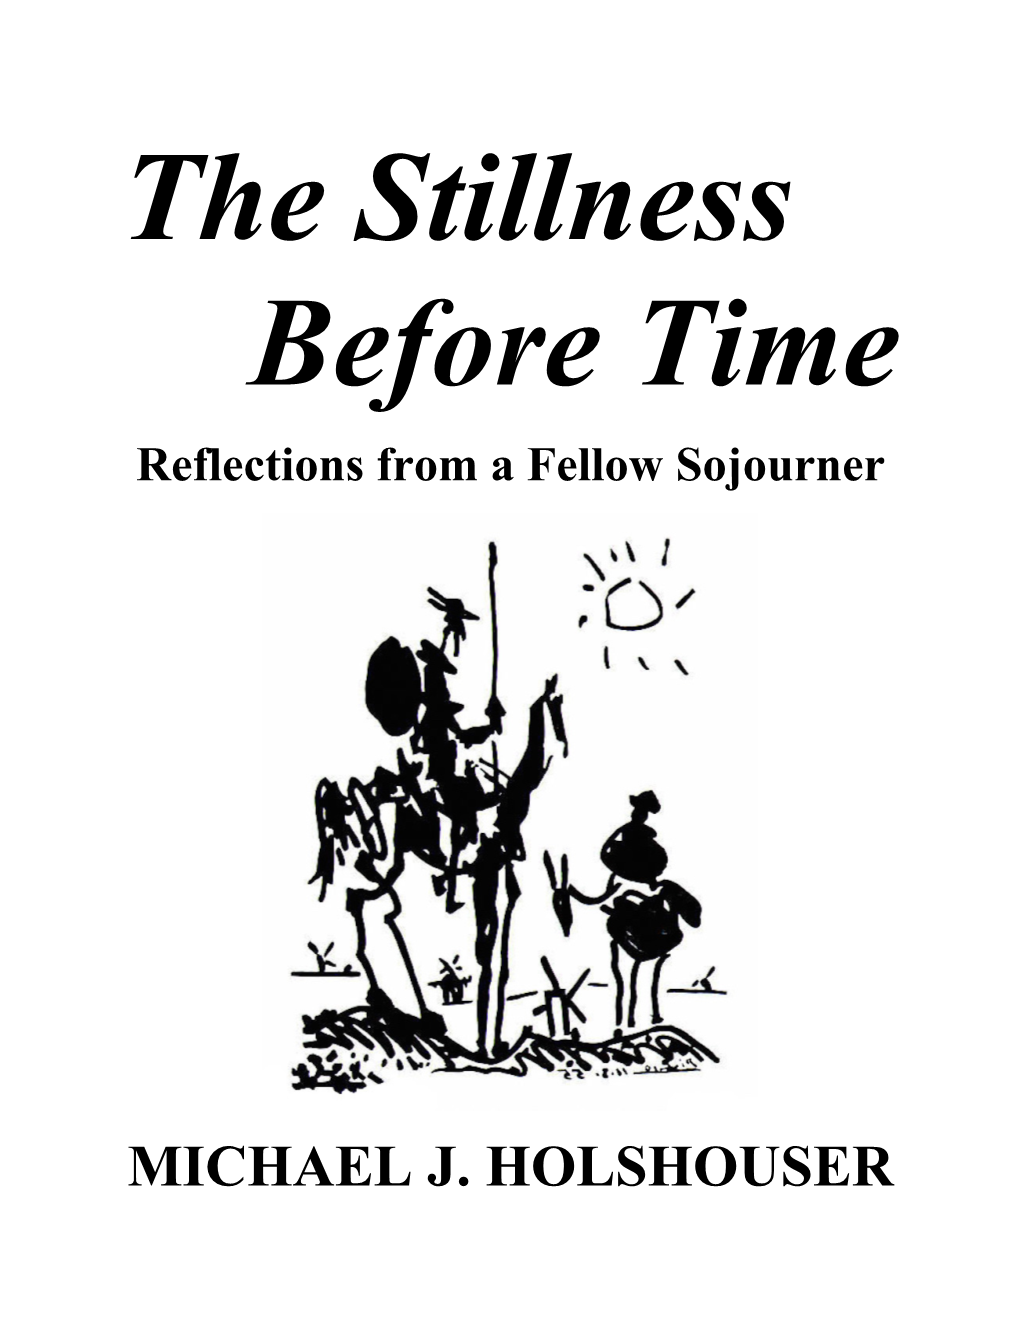 The Stillness Before Time (53 Pages)